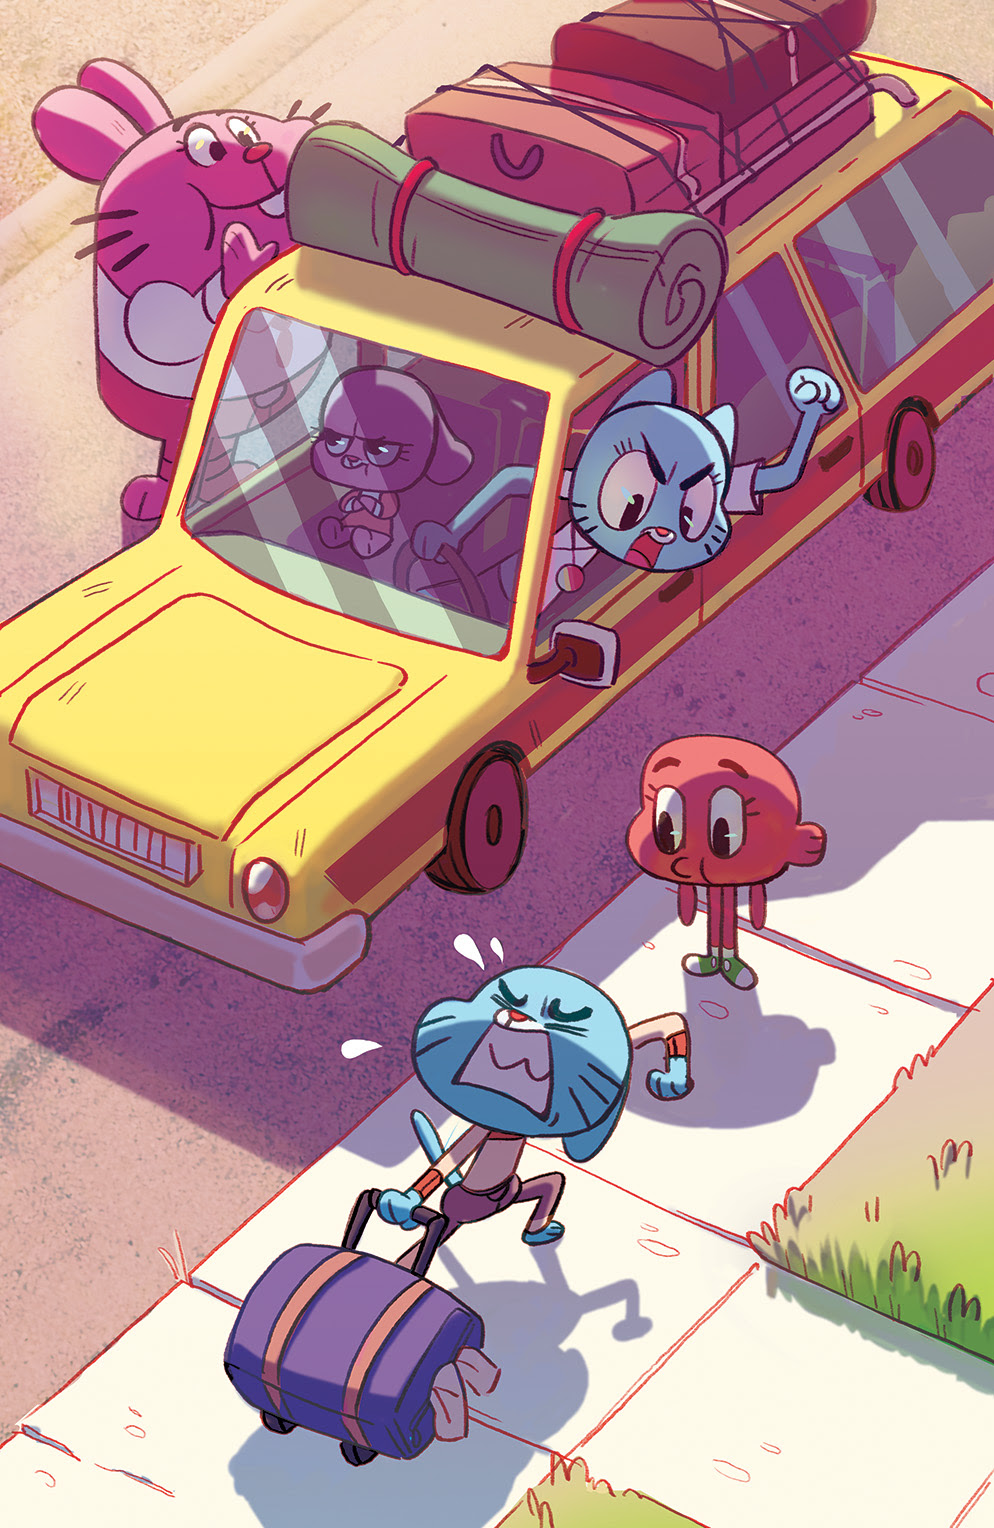 THE AMAZING WORLD OF GUMBALL #3 Cover B by Christina Chang